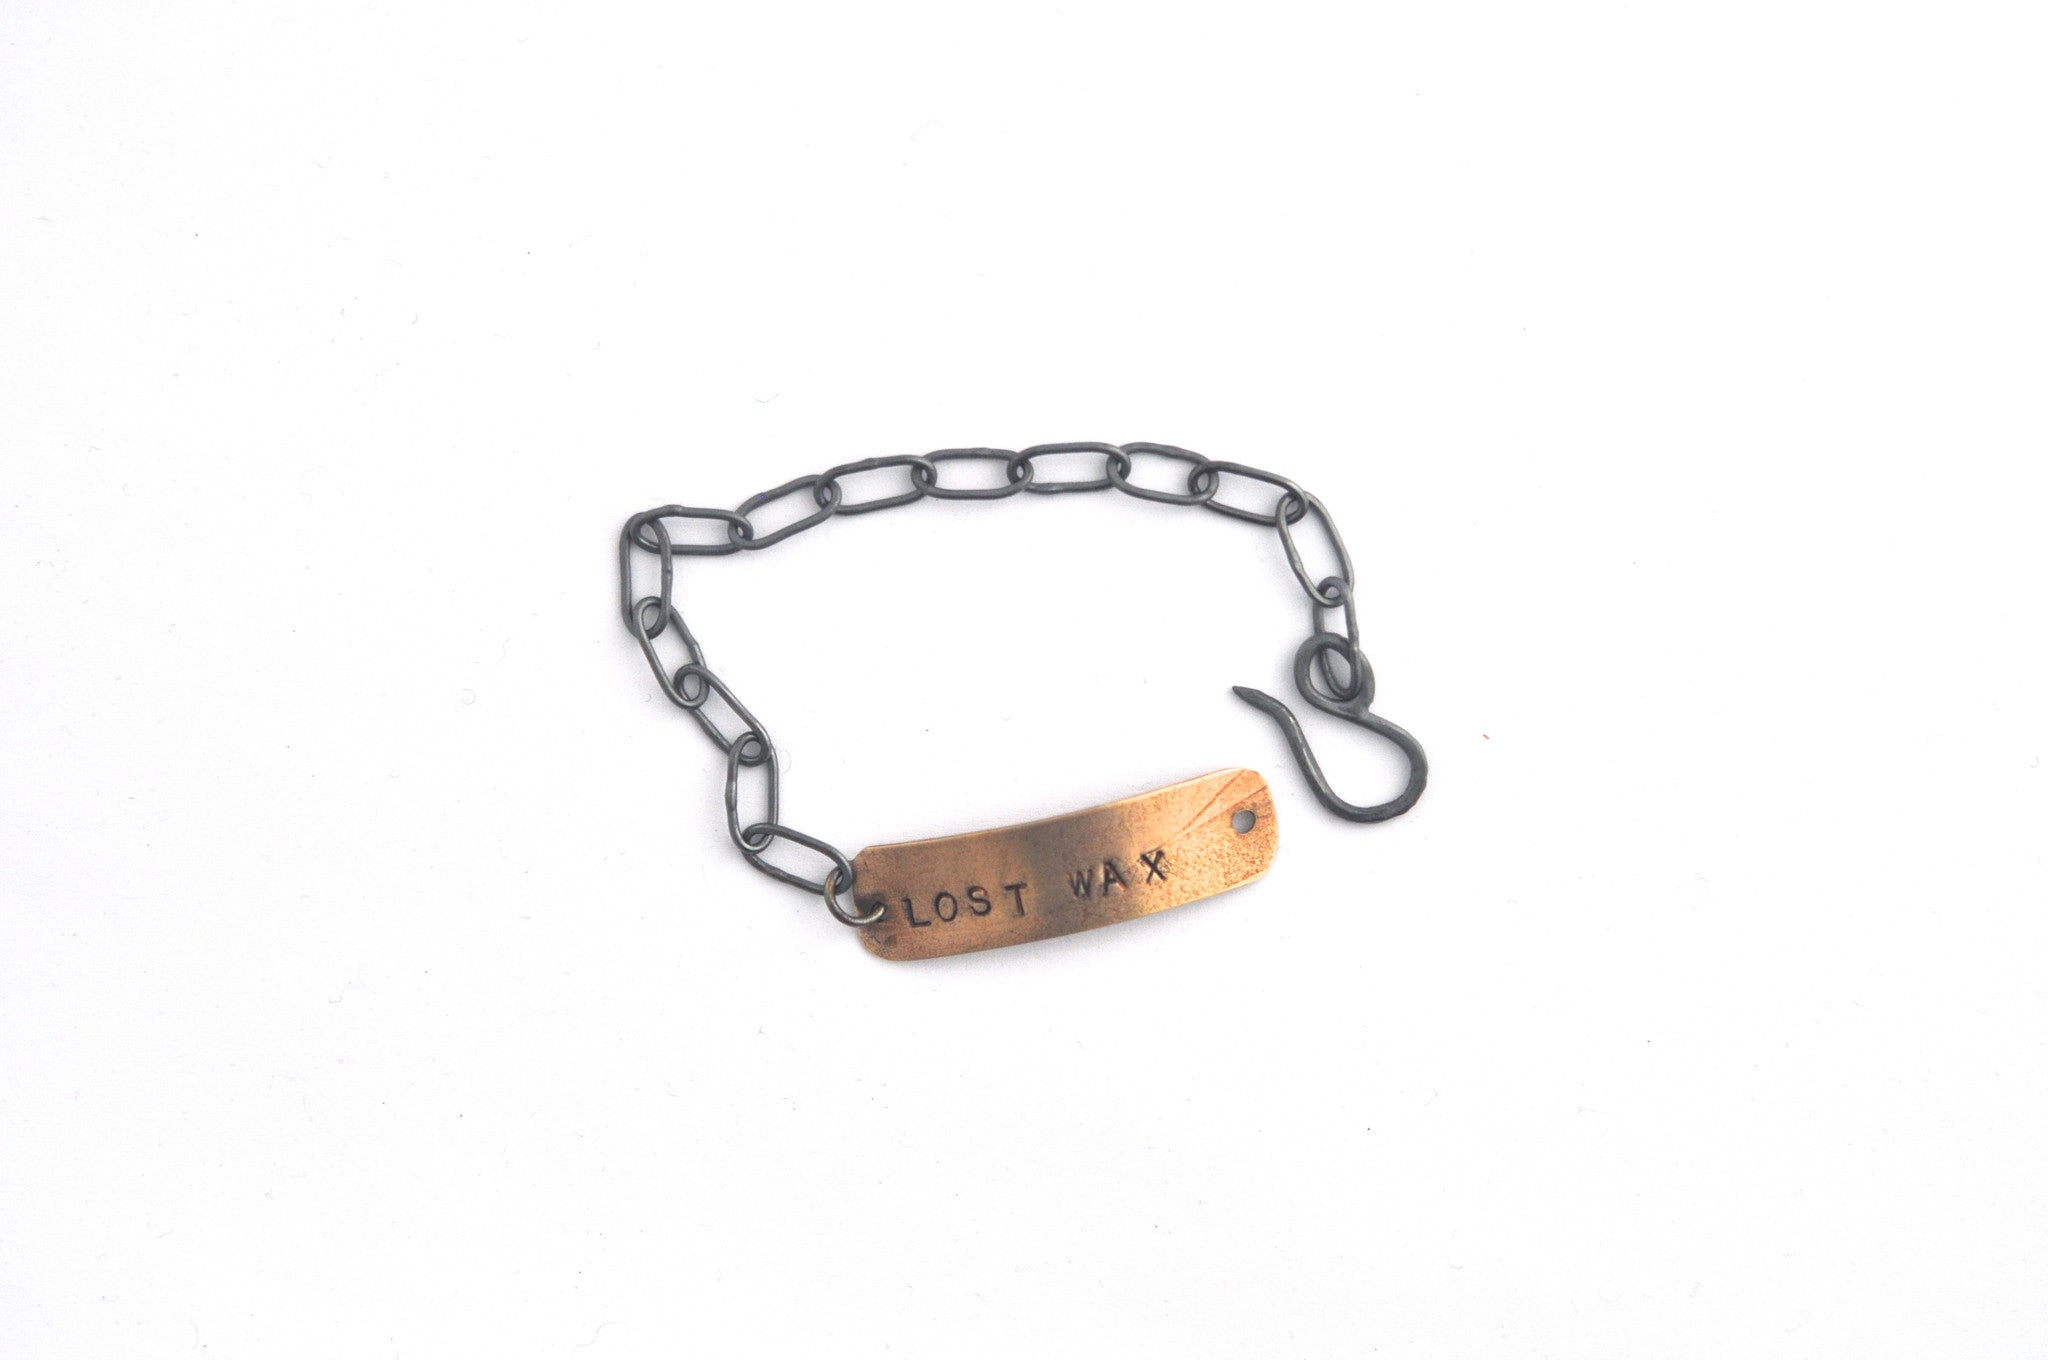 workshop / intro to working with metals: personalized silver link bracelet / necklace